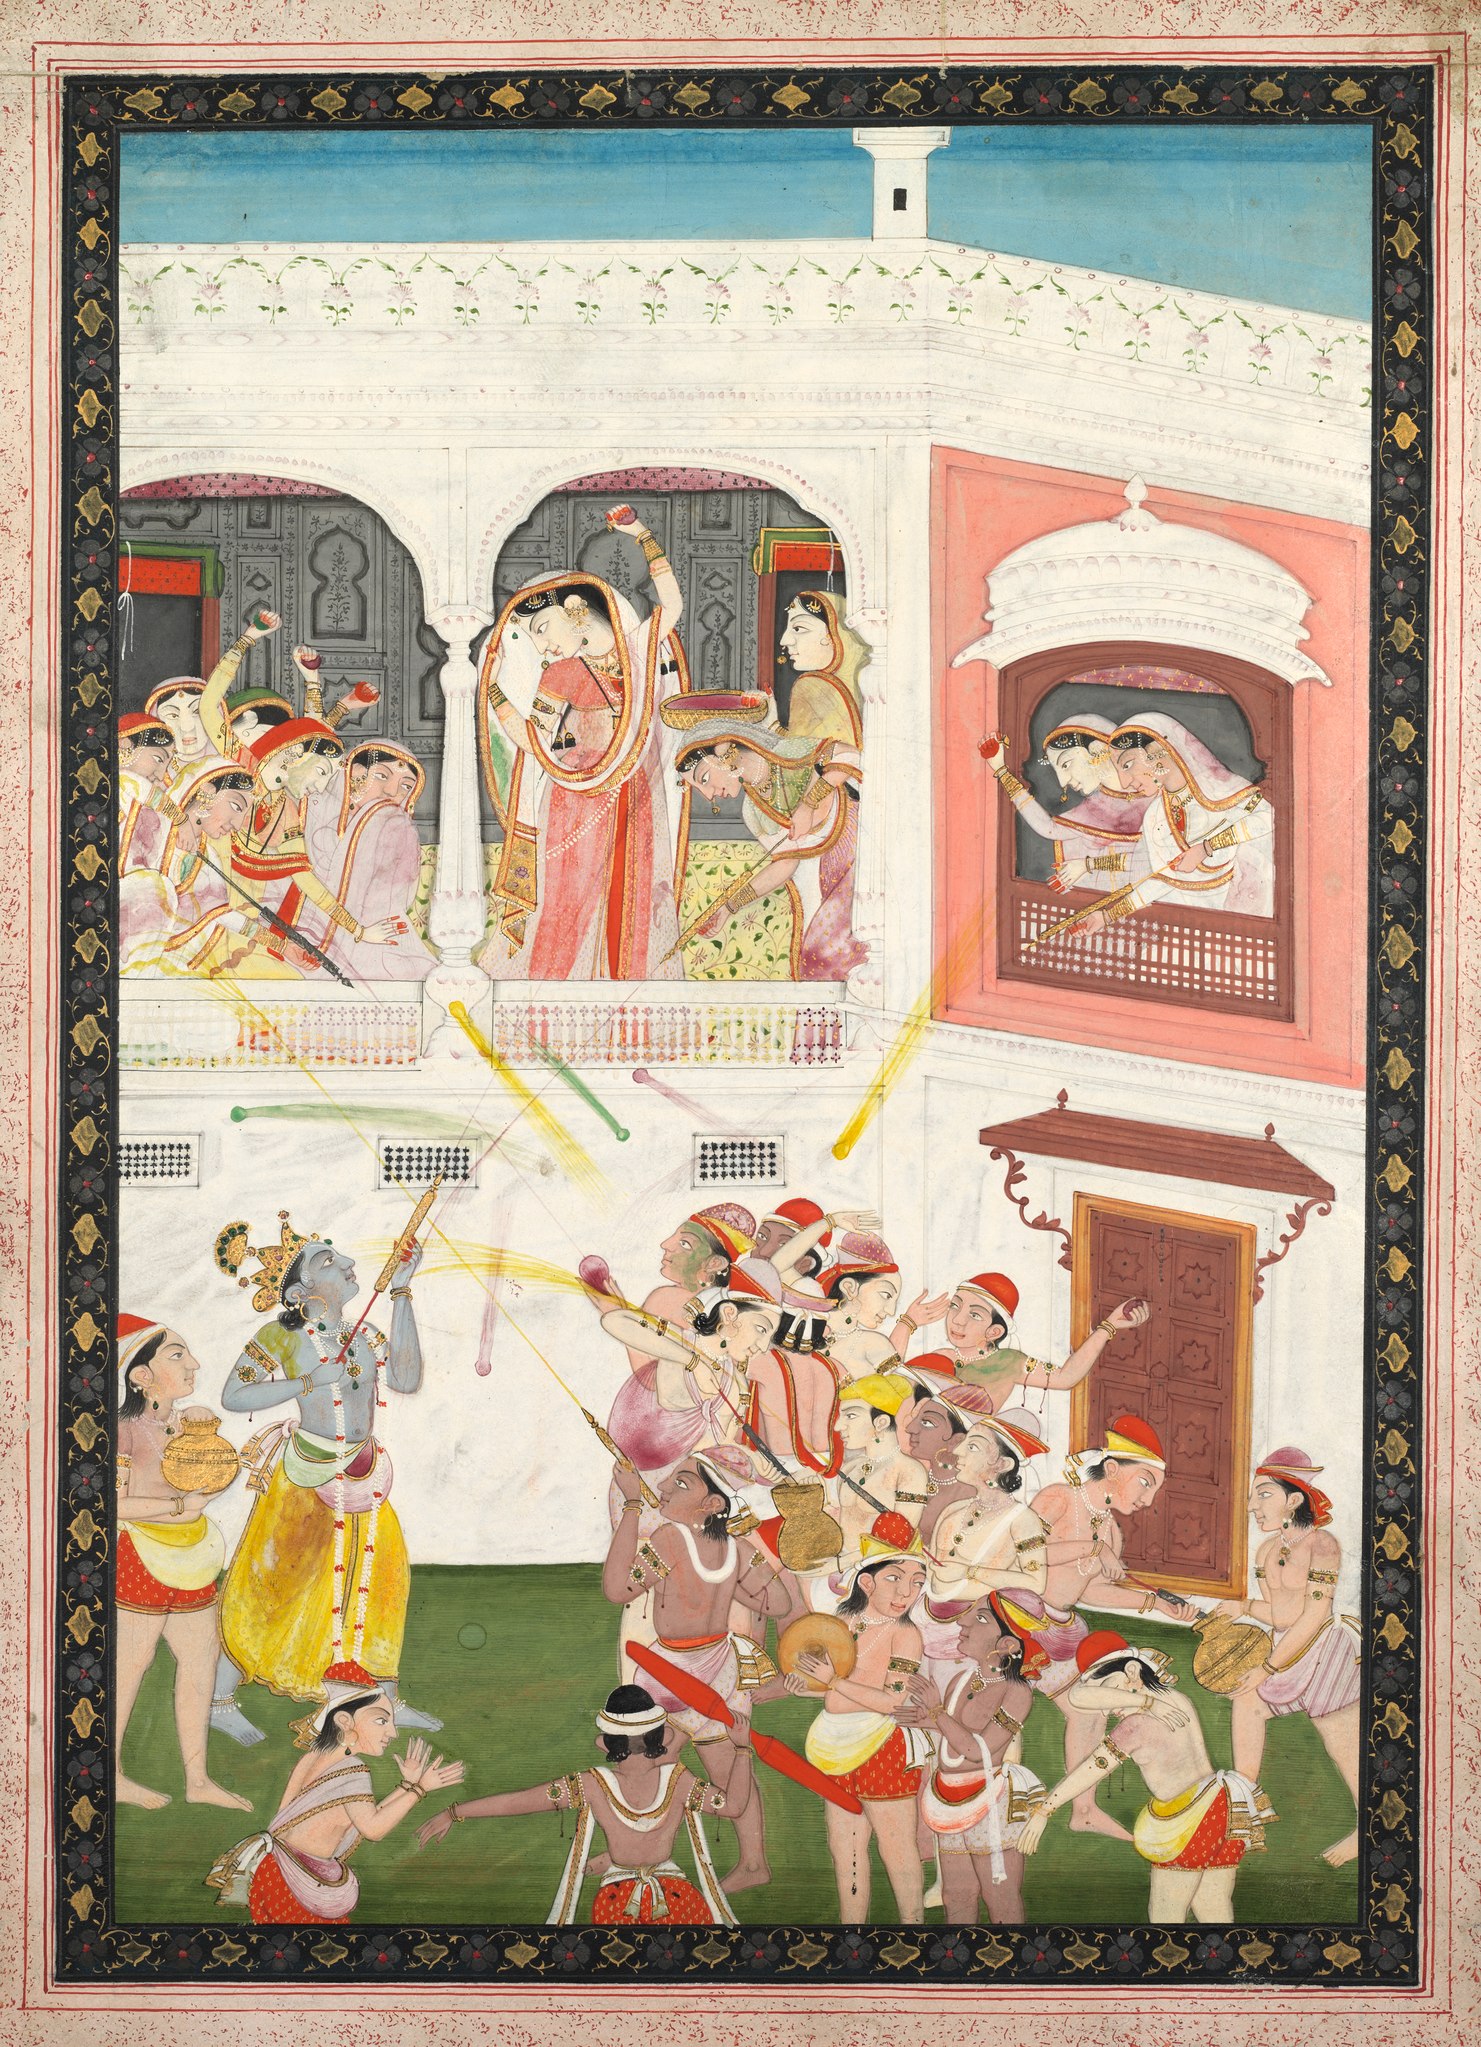 Krishna and his friends play Holi with Radha and her friends who throw colour at them from a balcony <br><br><hr> In 20-Holi-Pictures: Celebration through the Ages